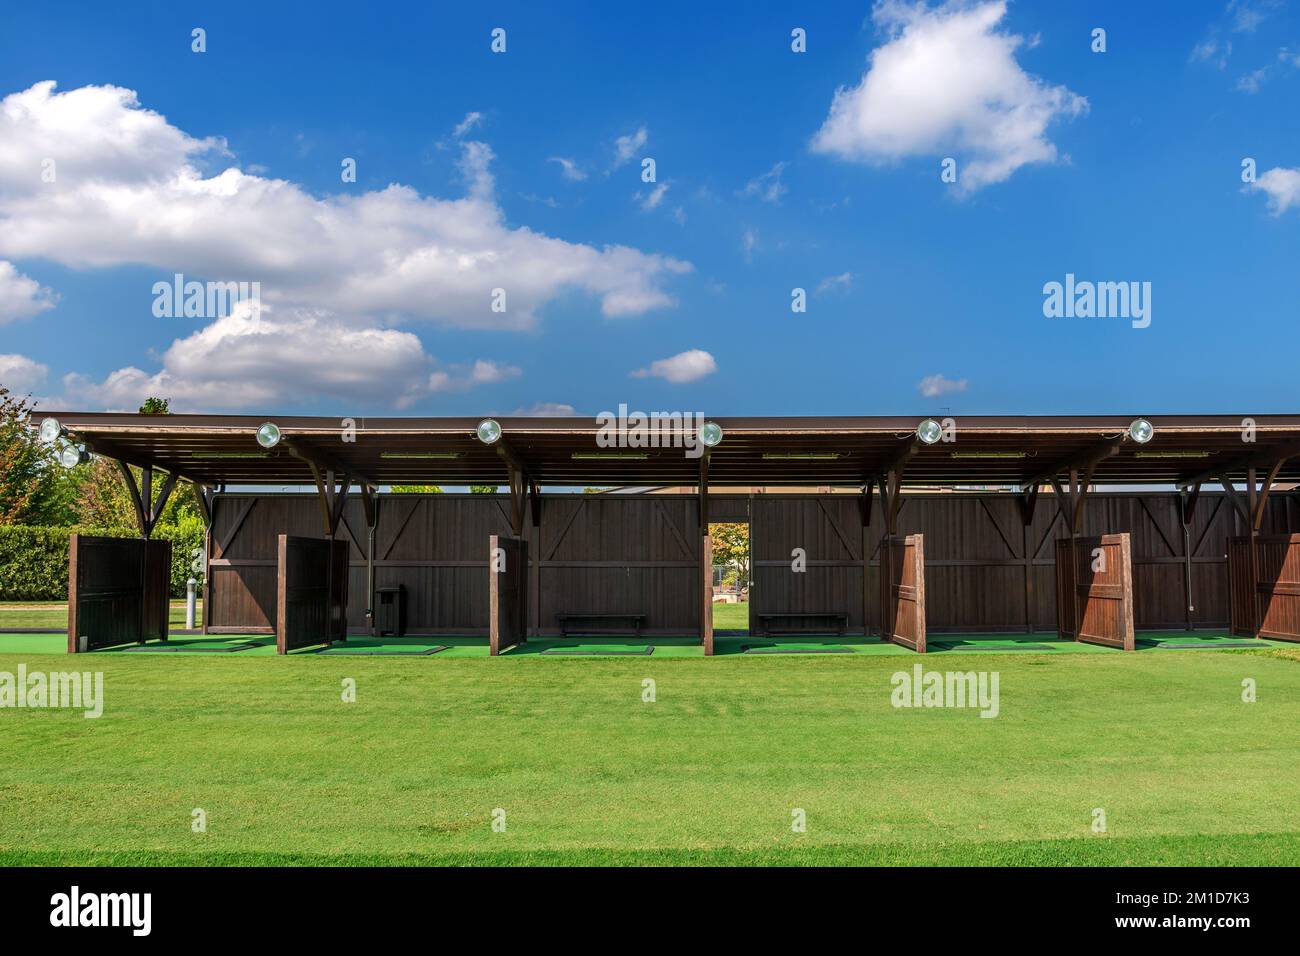 Shed with partitions located near grassy lawn against cloudy blue sky on driving range of golf course Stock Photo